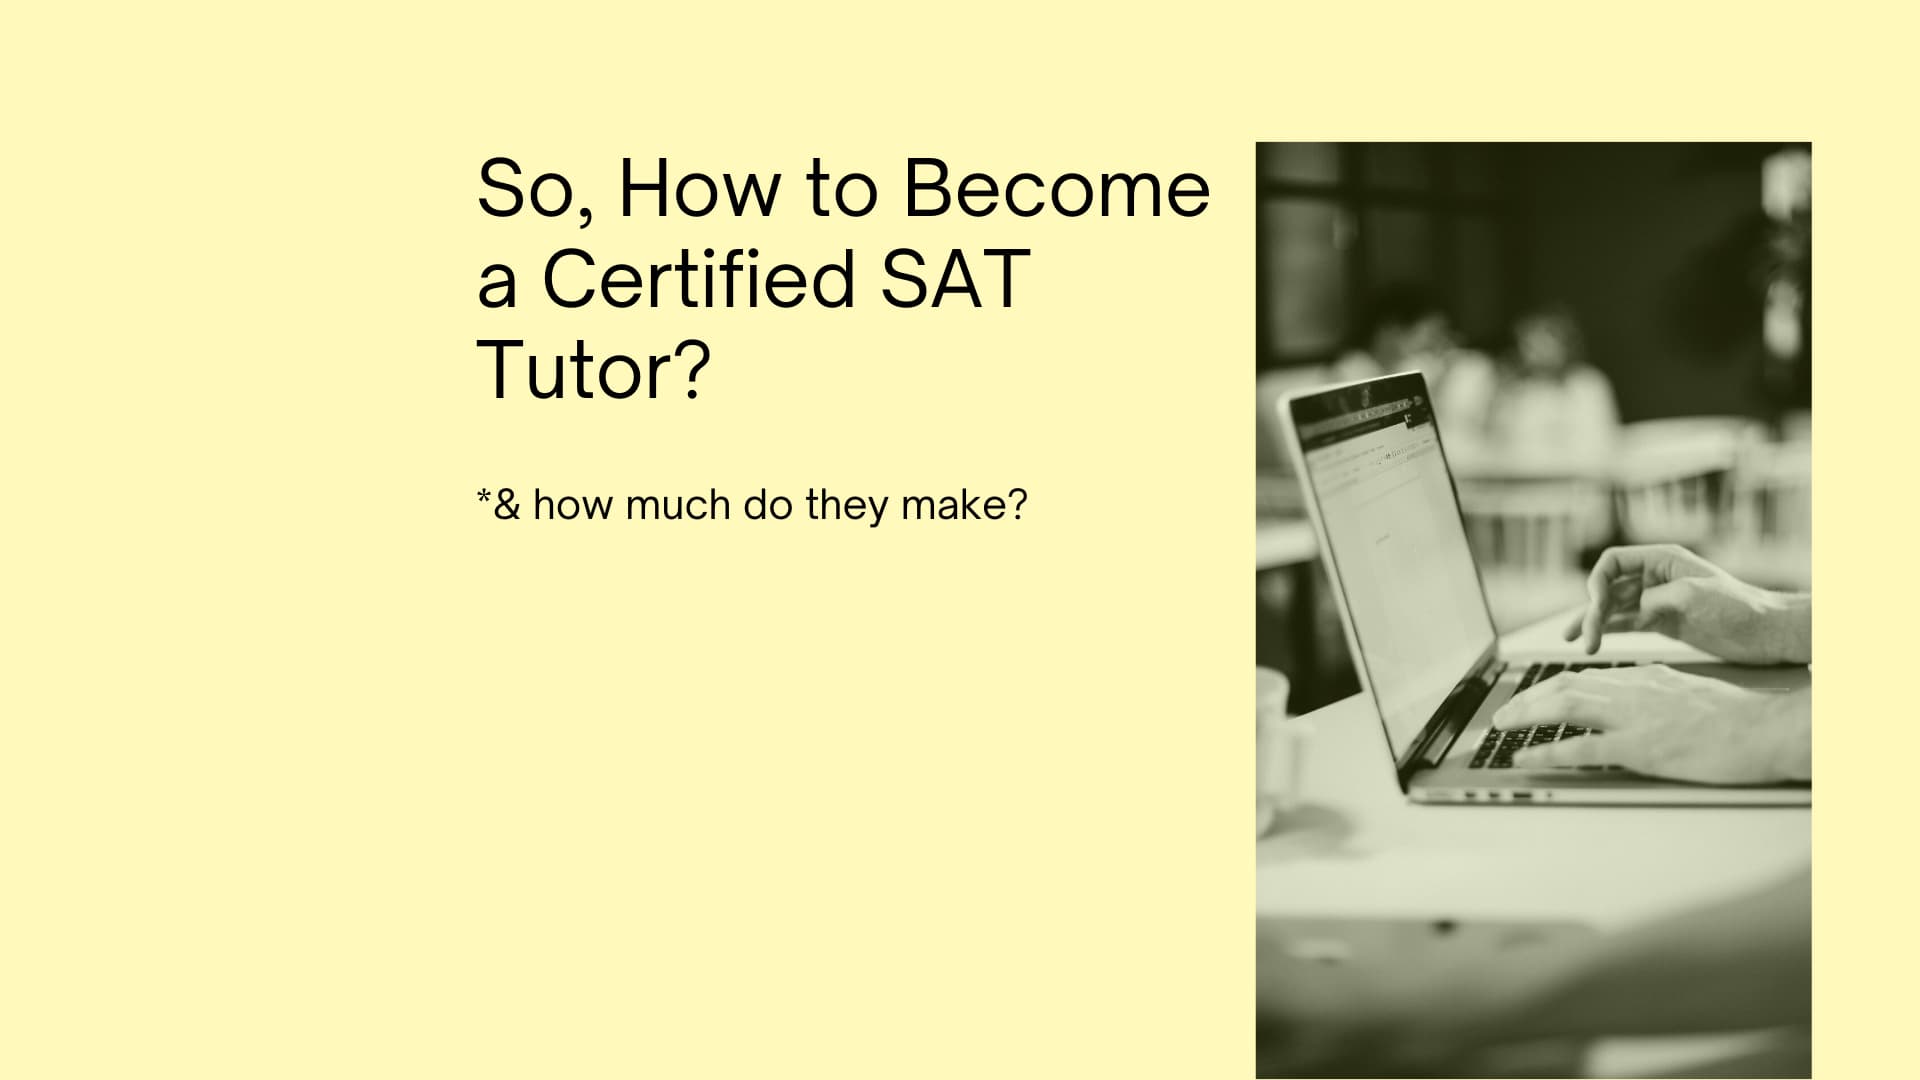 How to Become a Certified SAT Tutor?